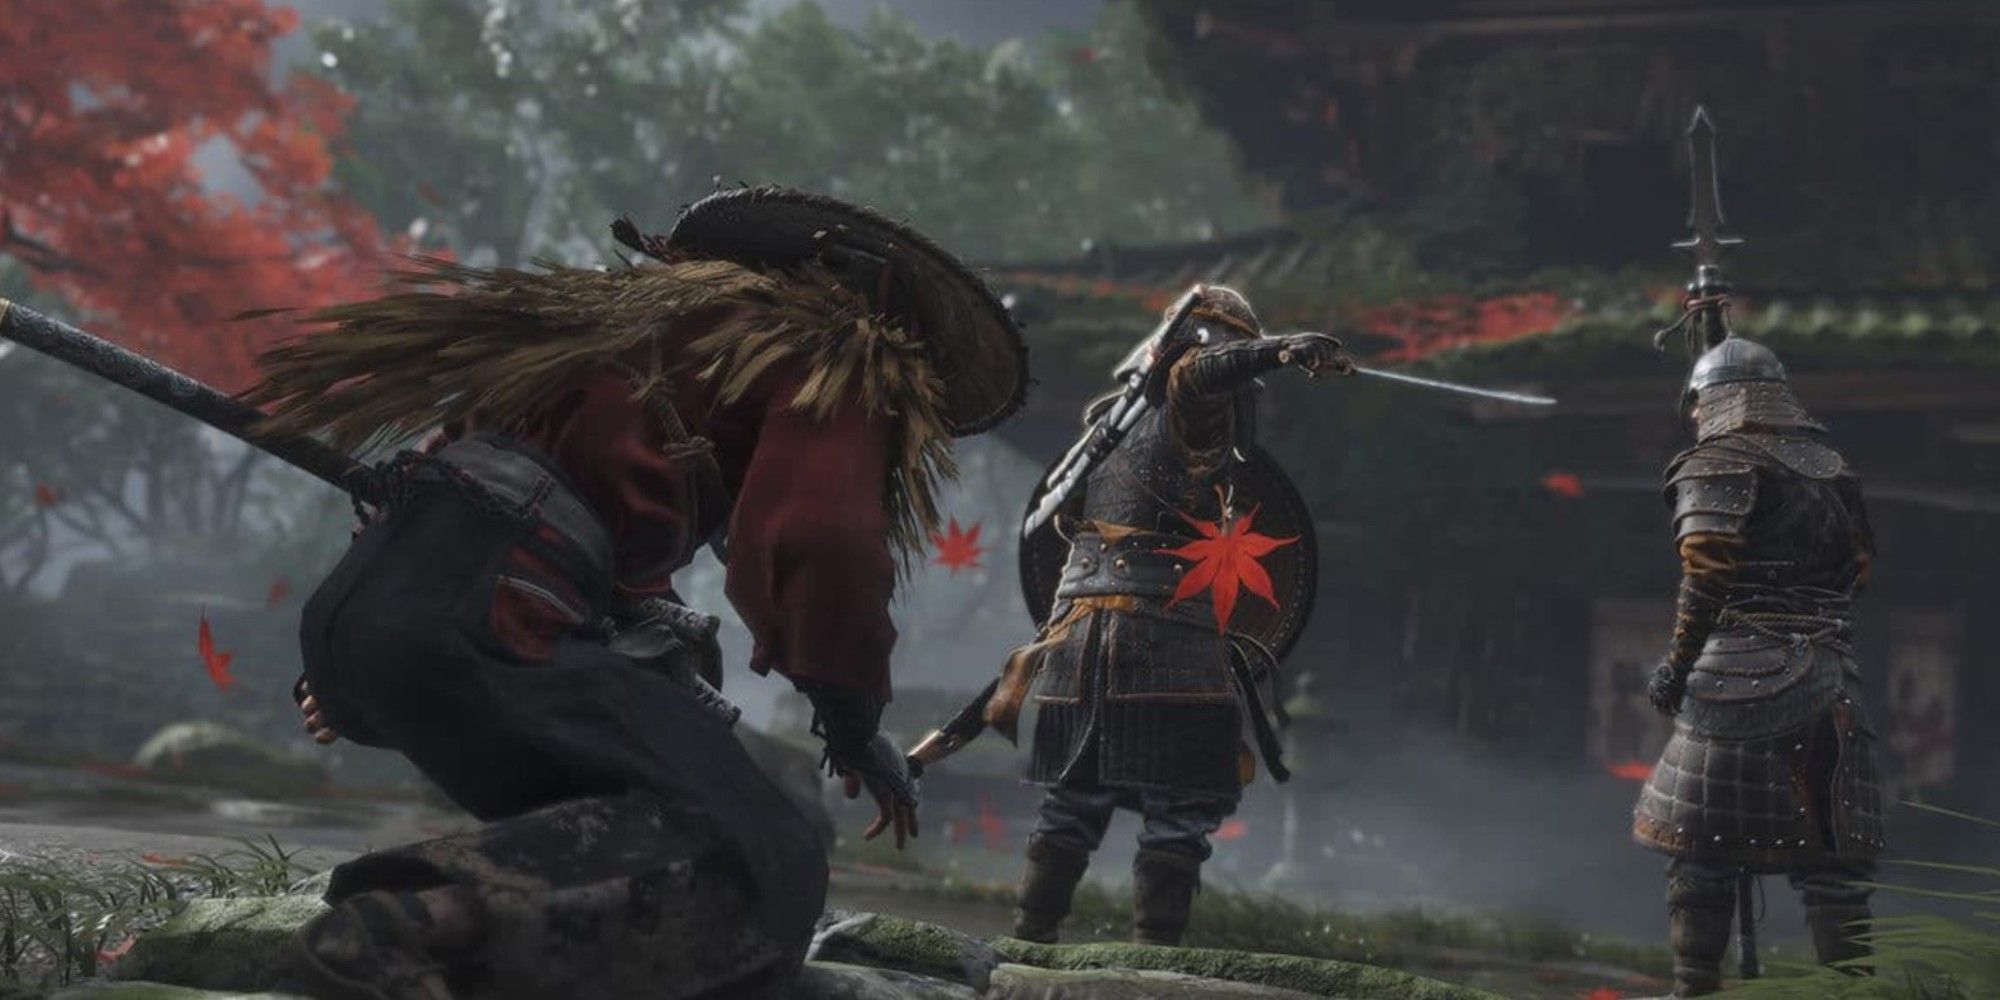 Forget Days Gone, Ghost Of Tsushima is Sony's worst game